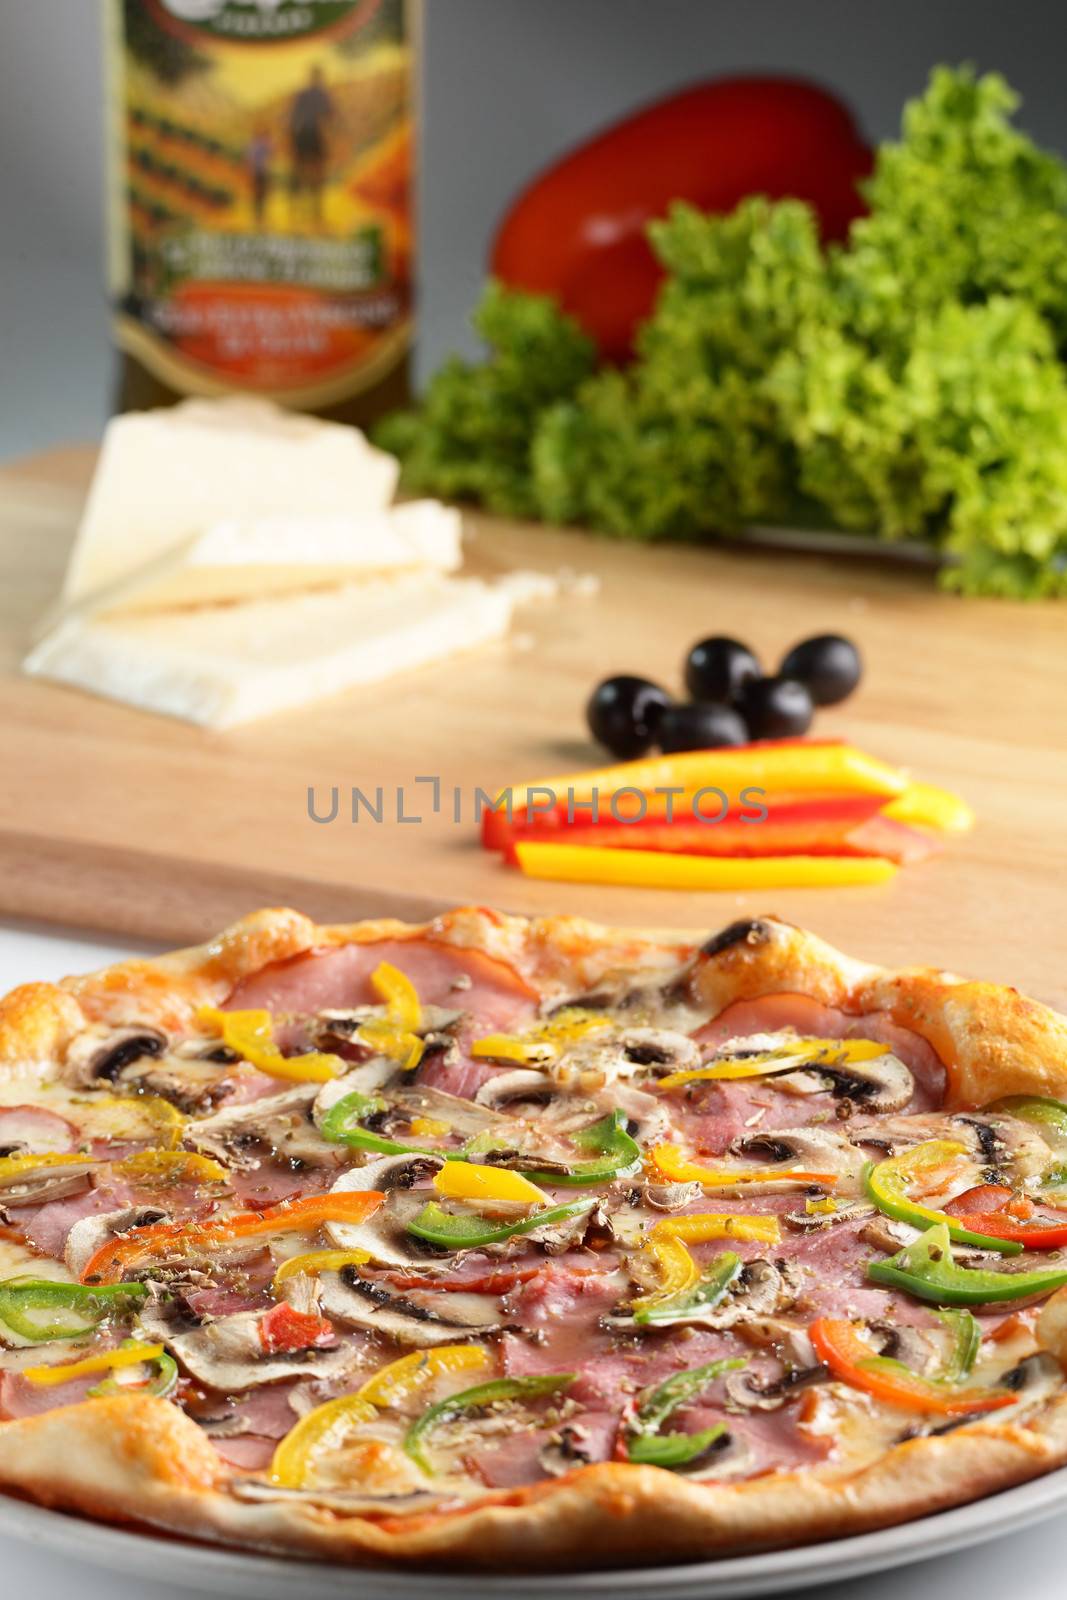 hot pizza and tasty pizza by fiphoto